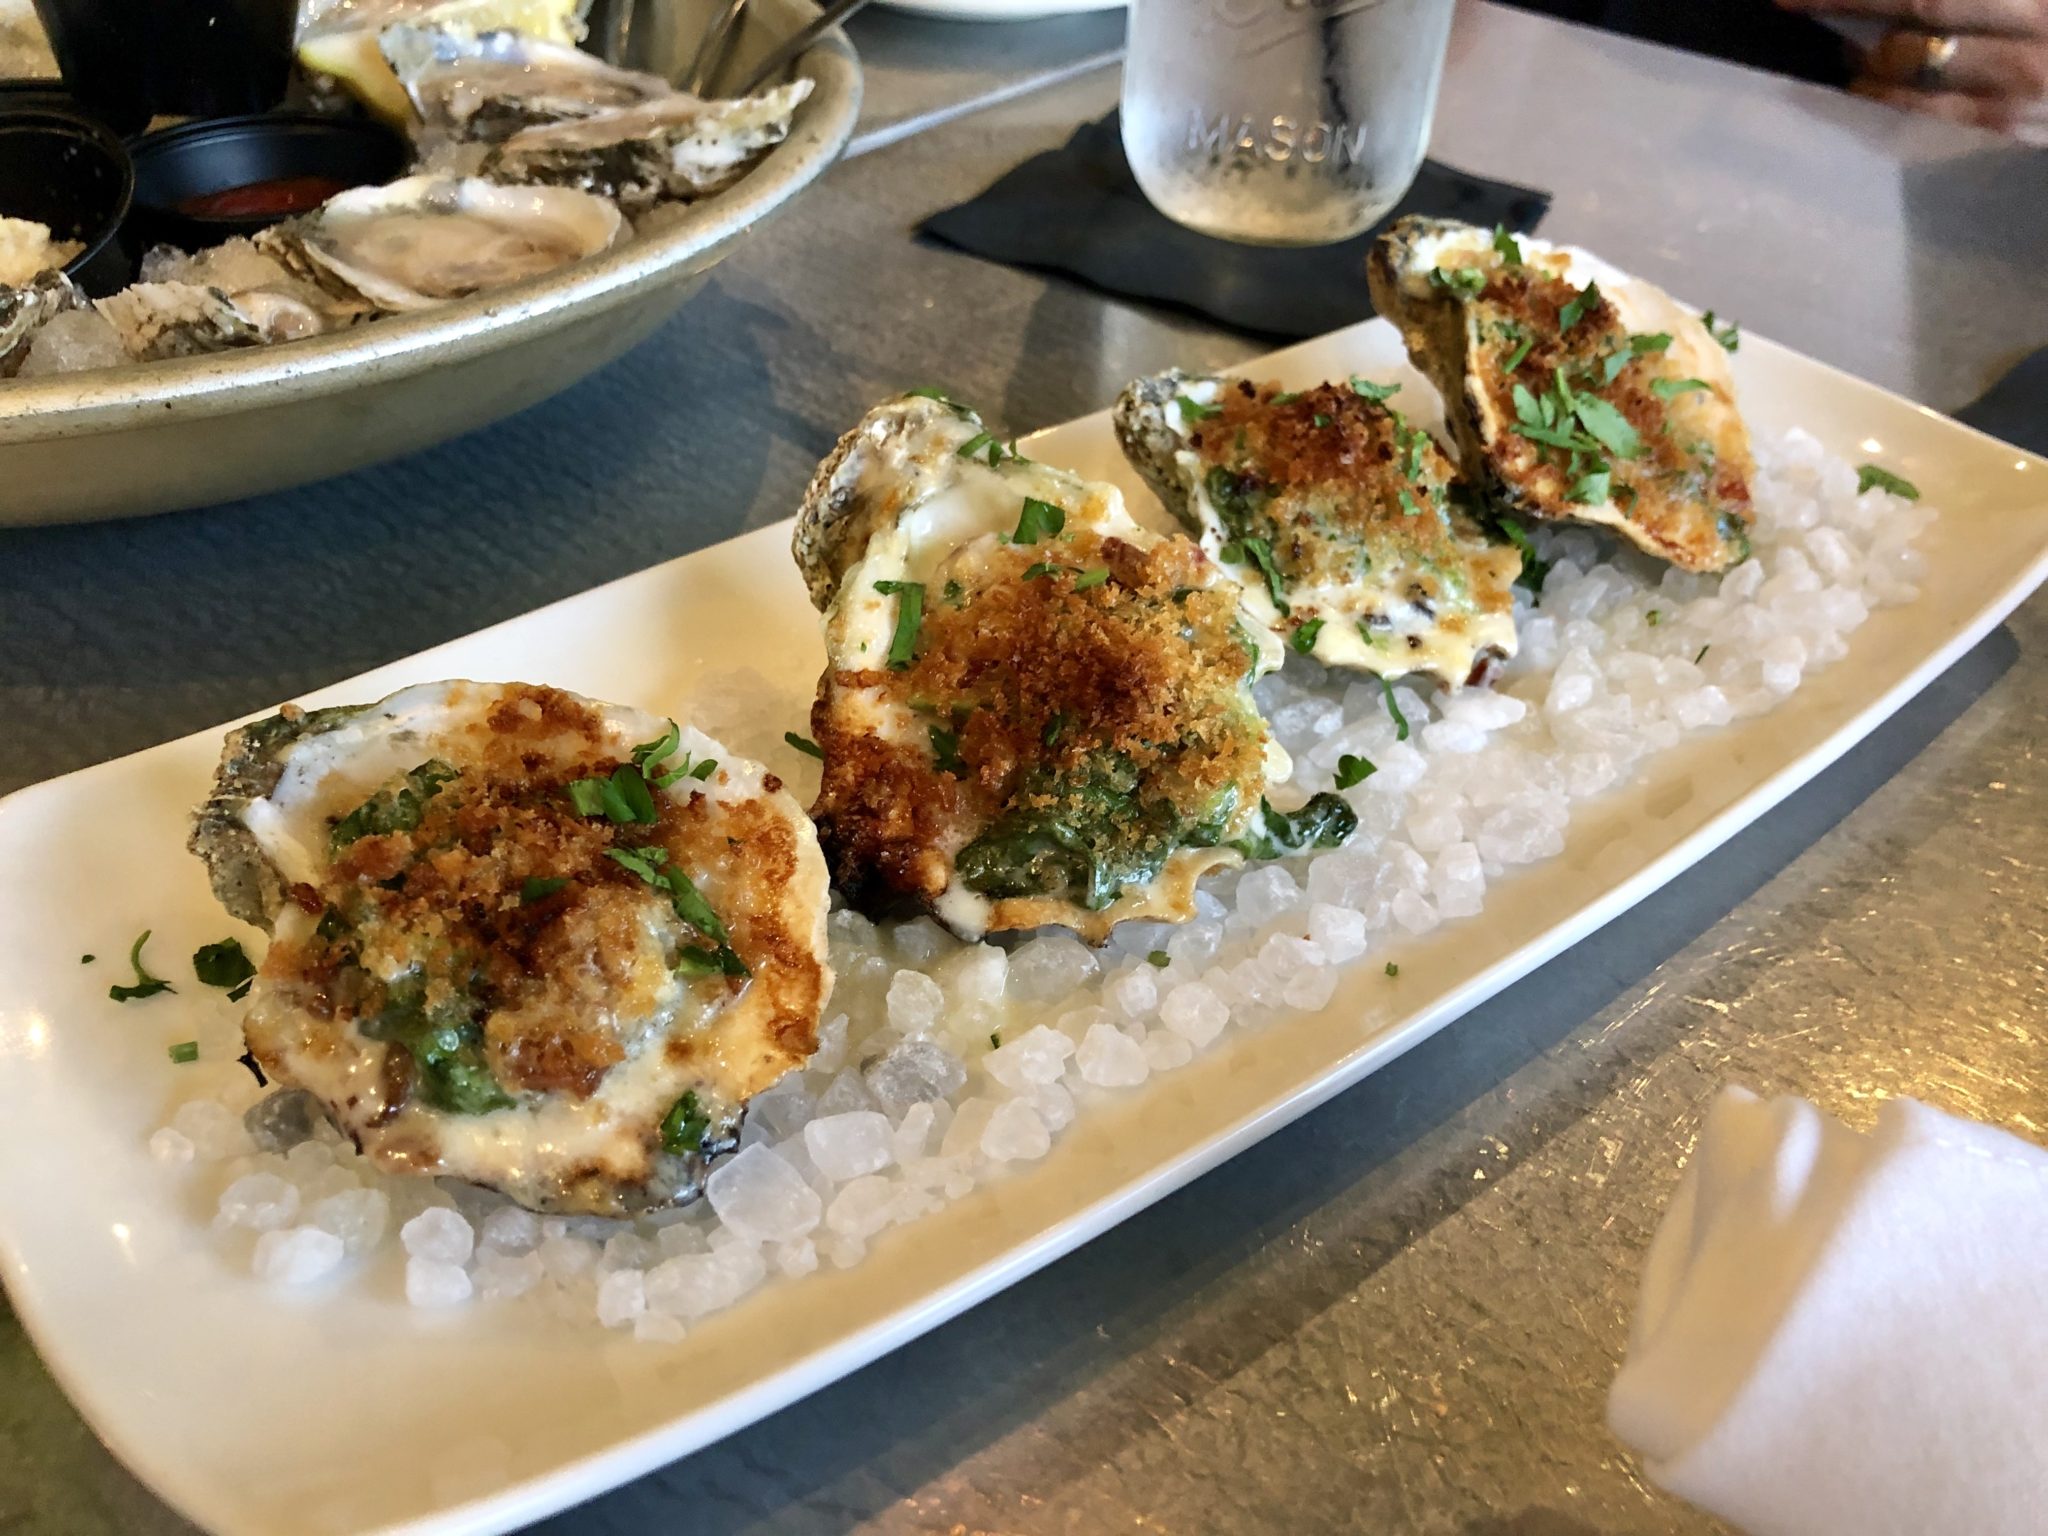 The dive oyster bar